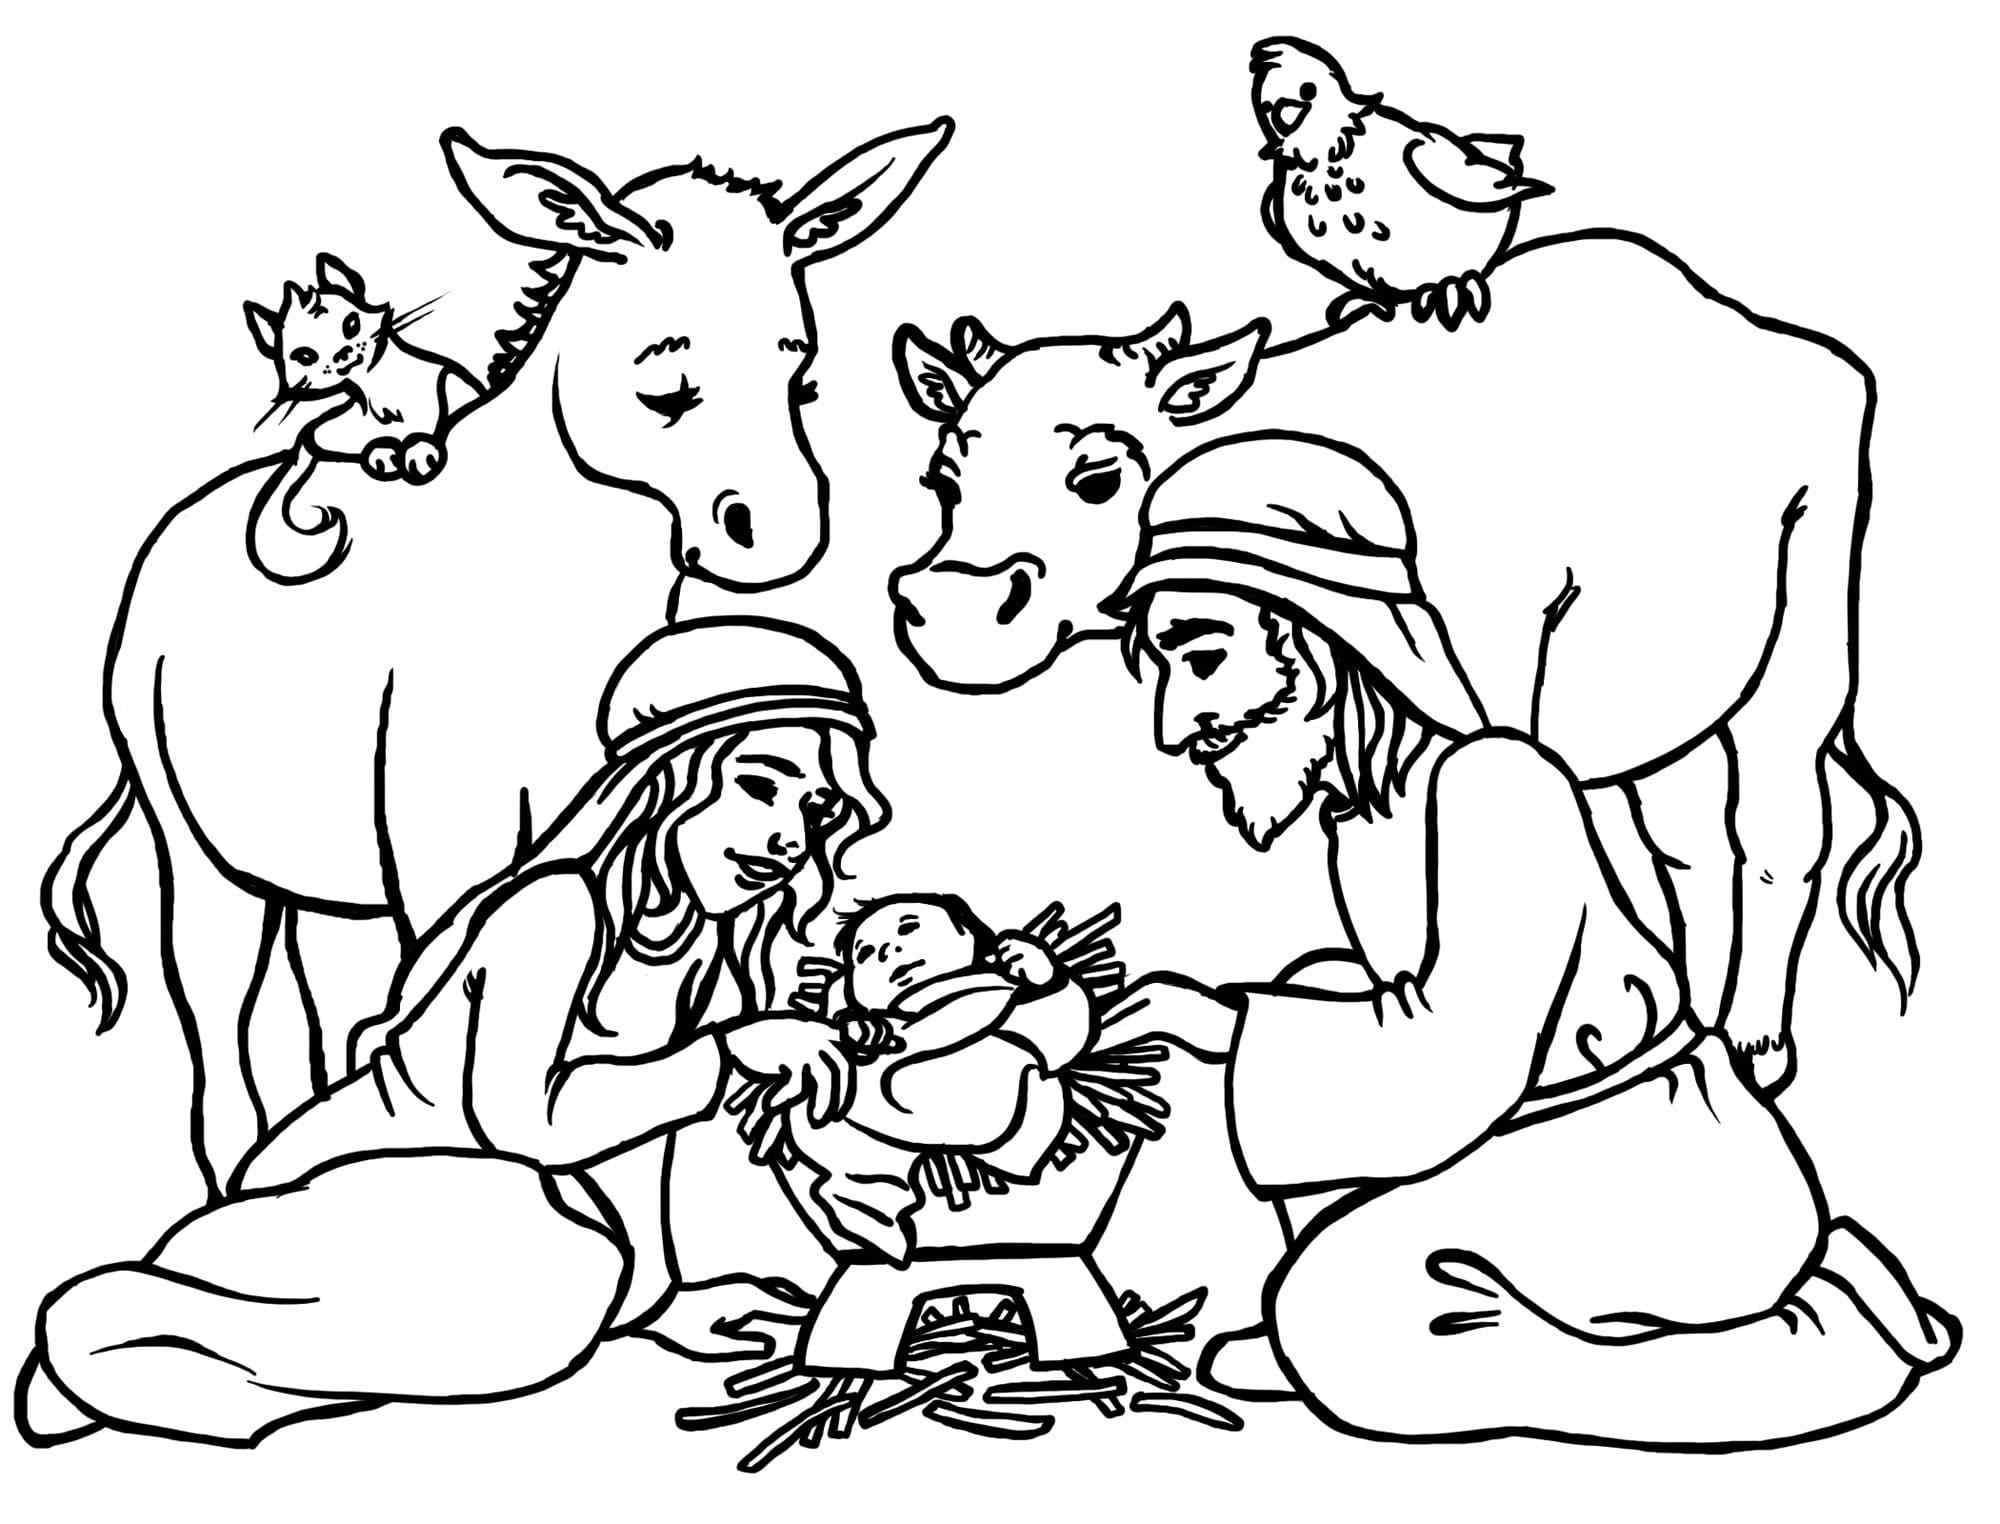 Gifts To The Divine Infant Coloring Page